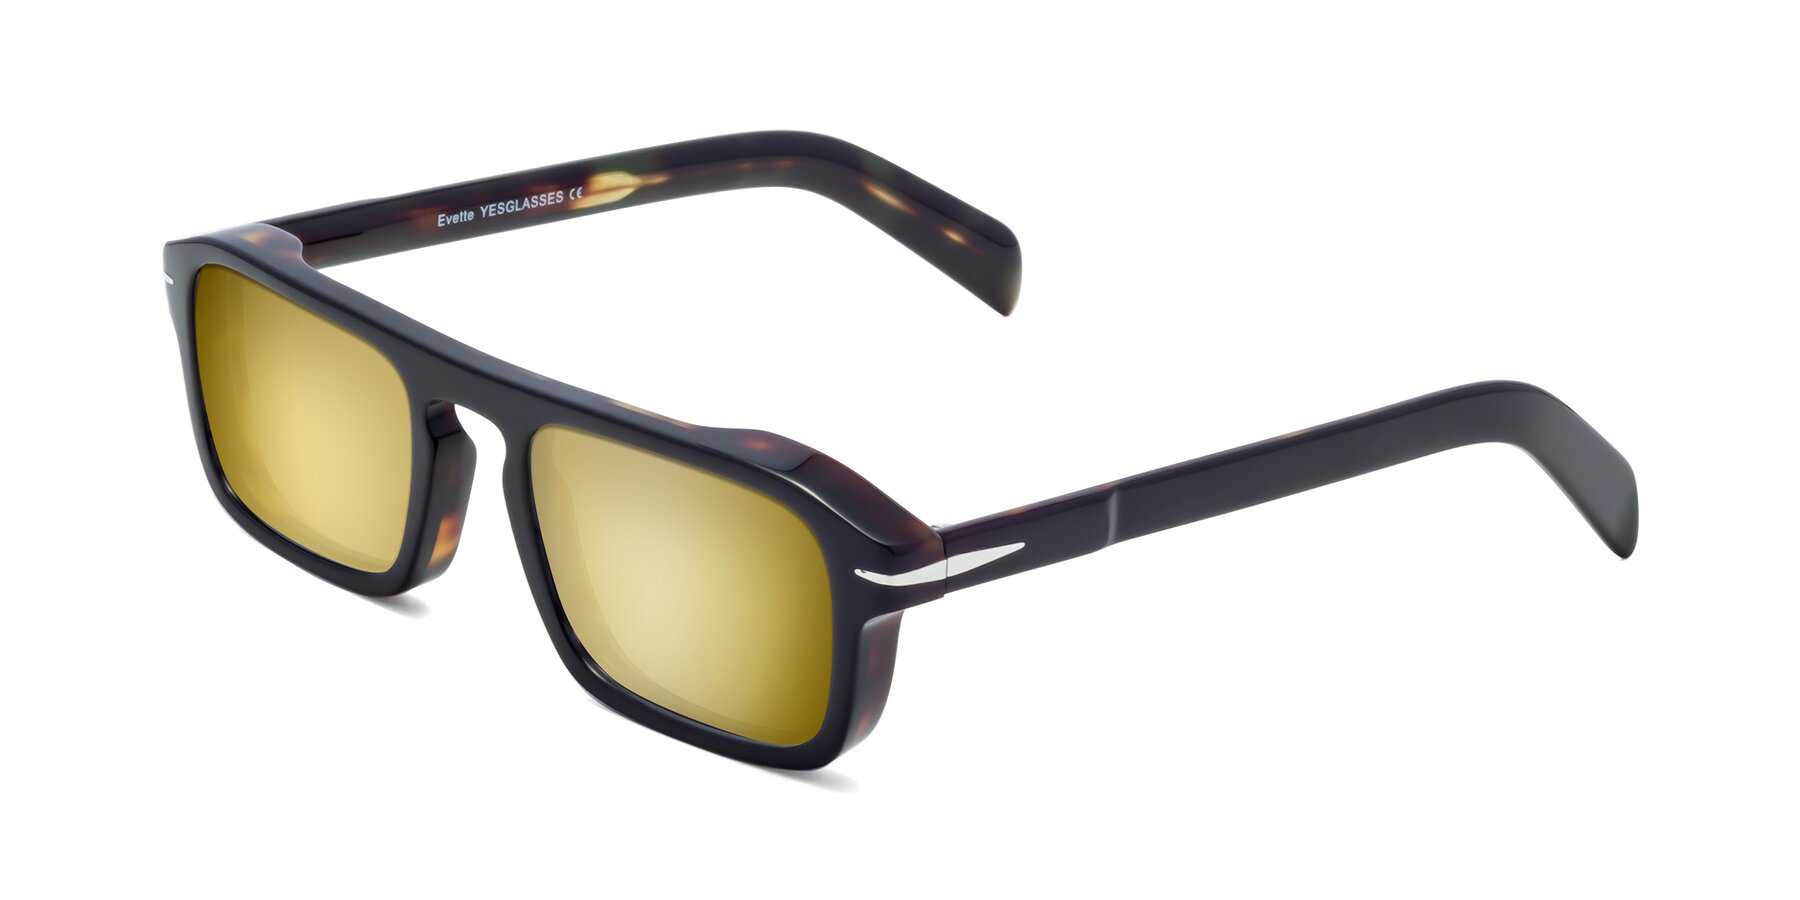 Angle of Evette in Black-Tortoise with Gold Mirrored Lenses